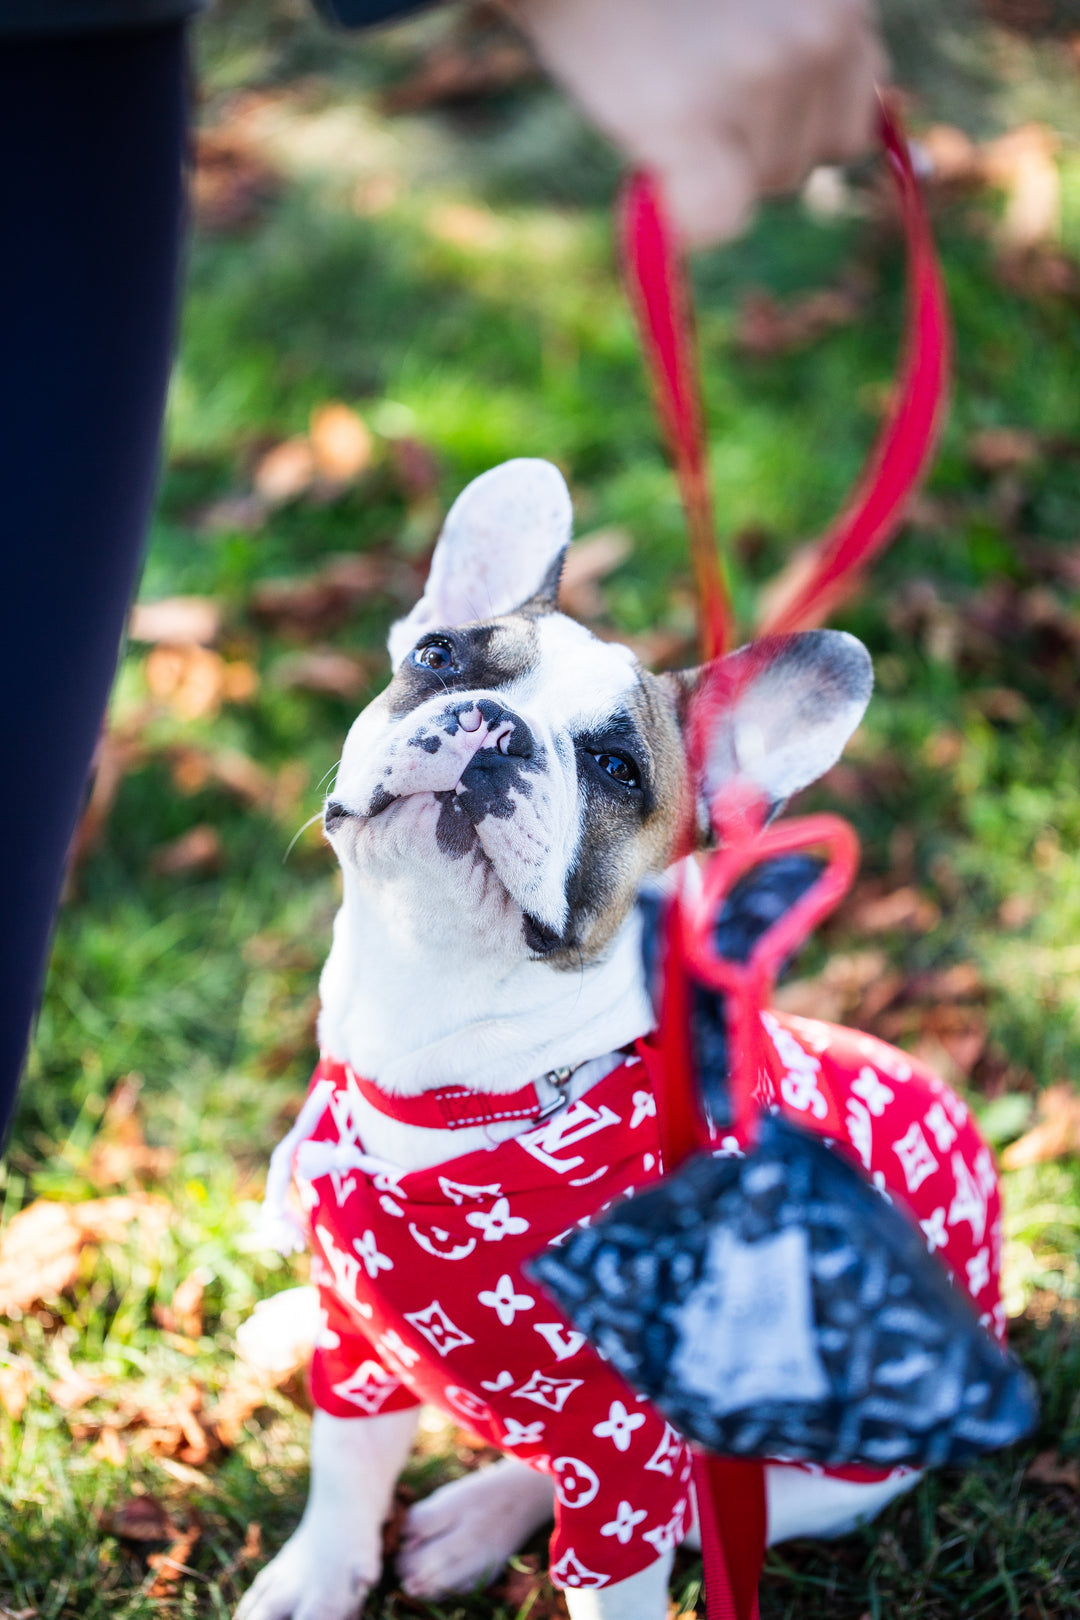 Cute French bulldog with red dooloop holding poop on his leash on a fall day